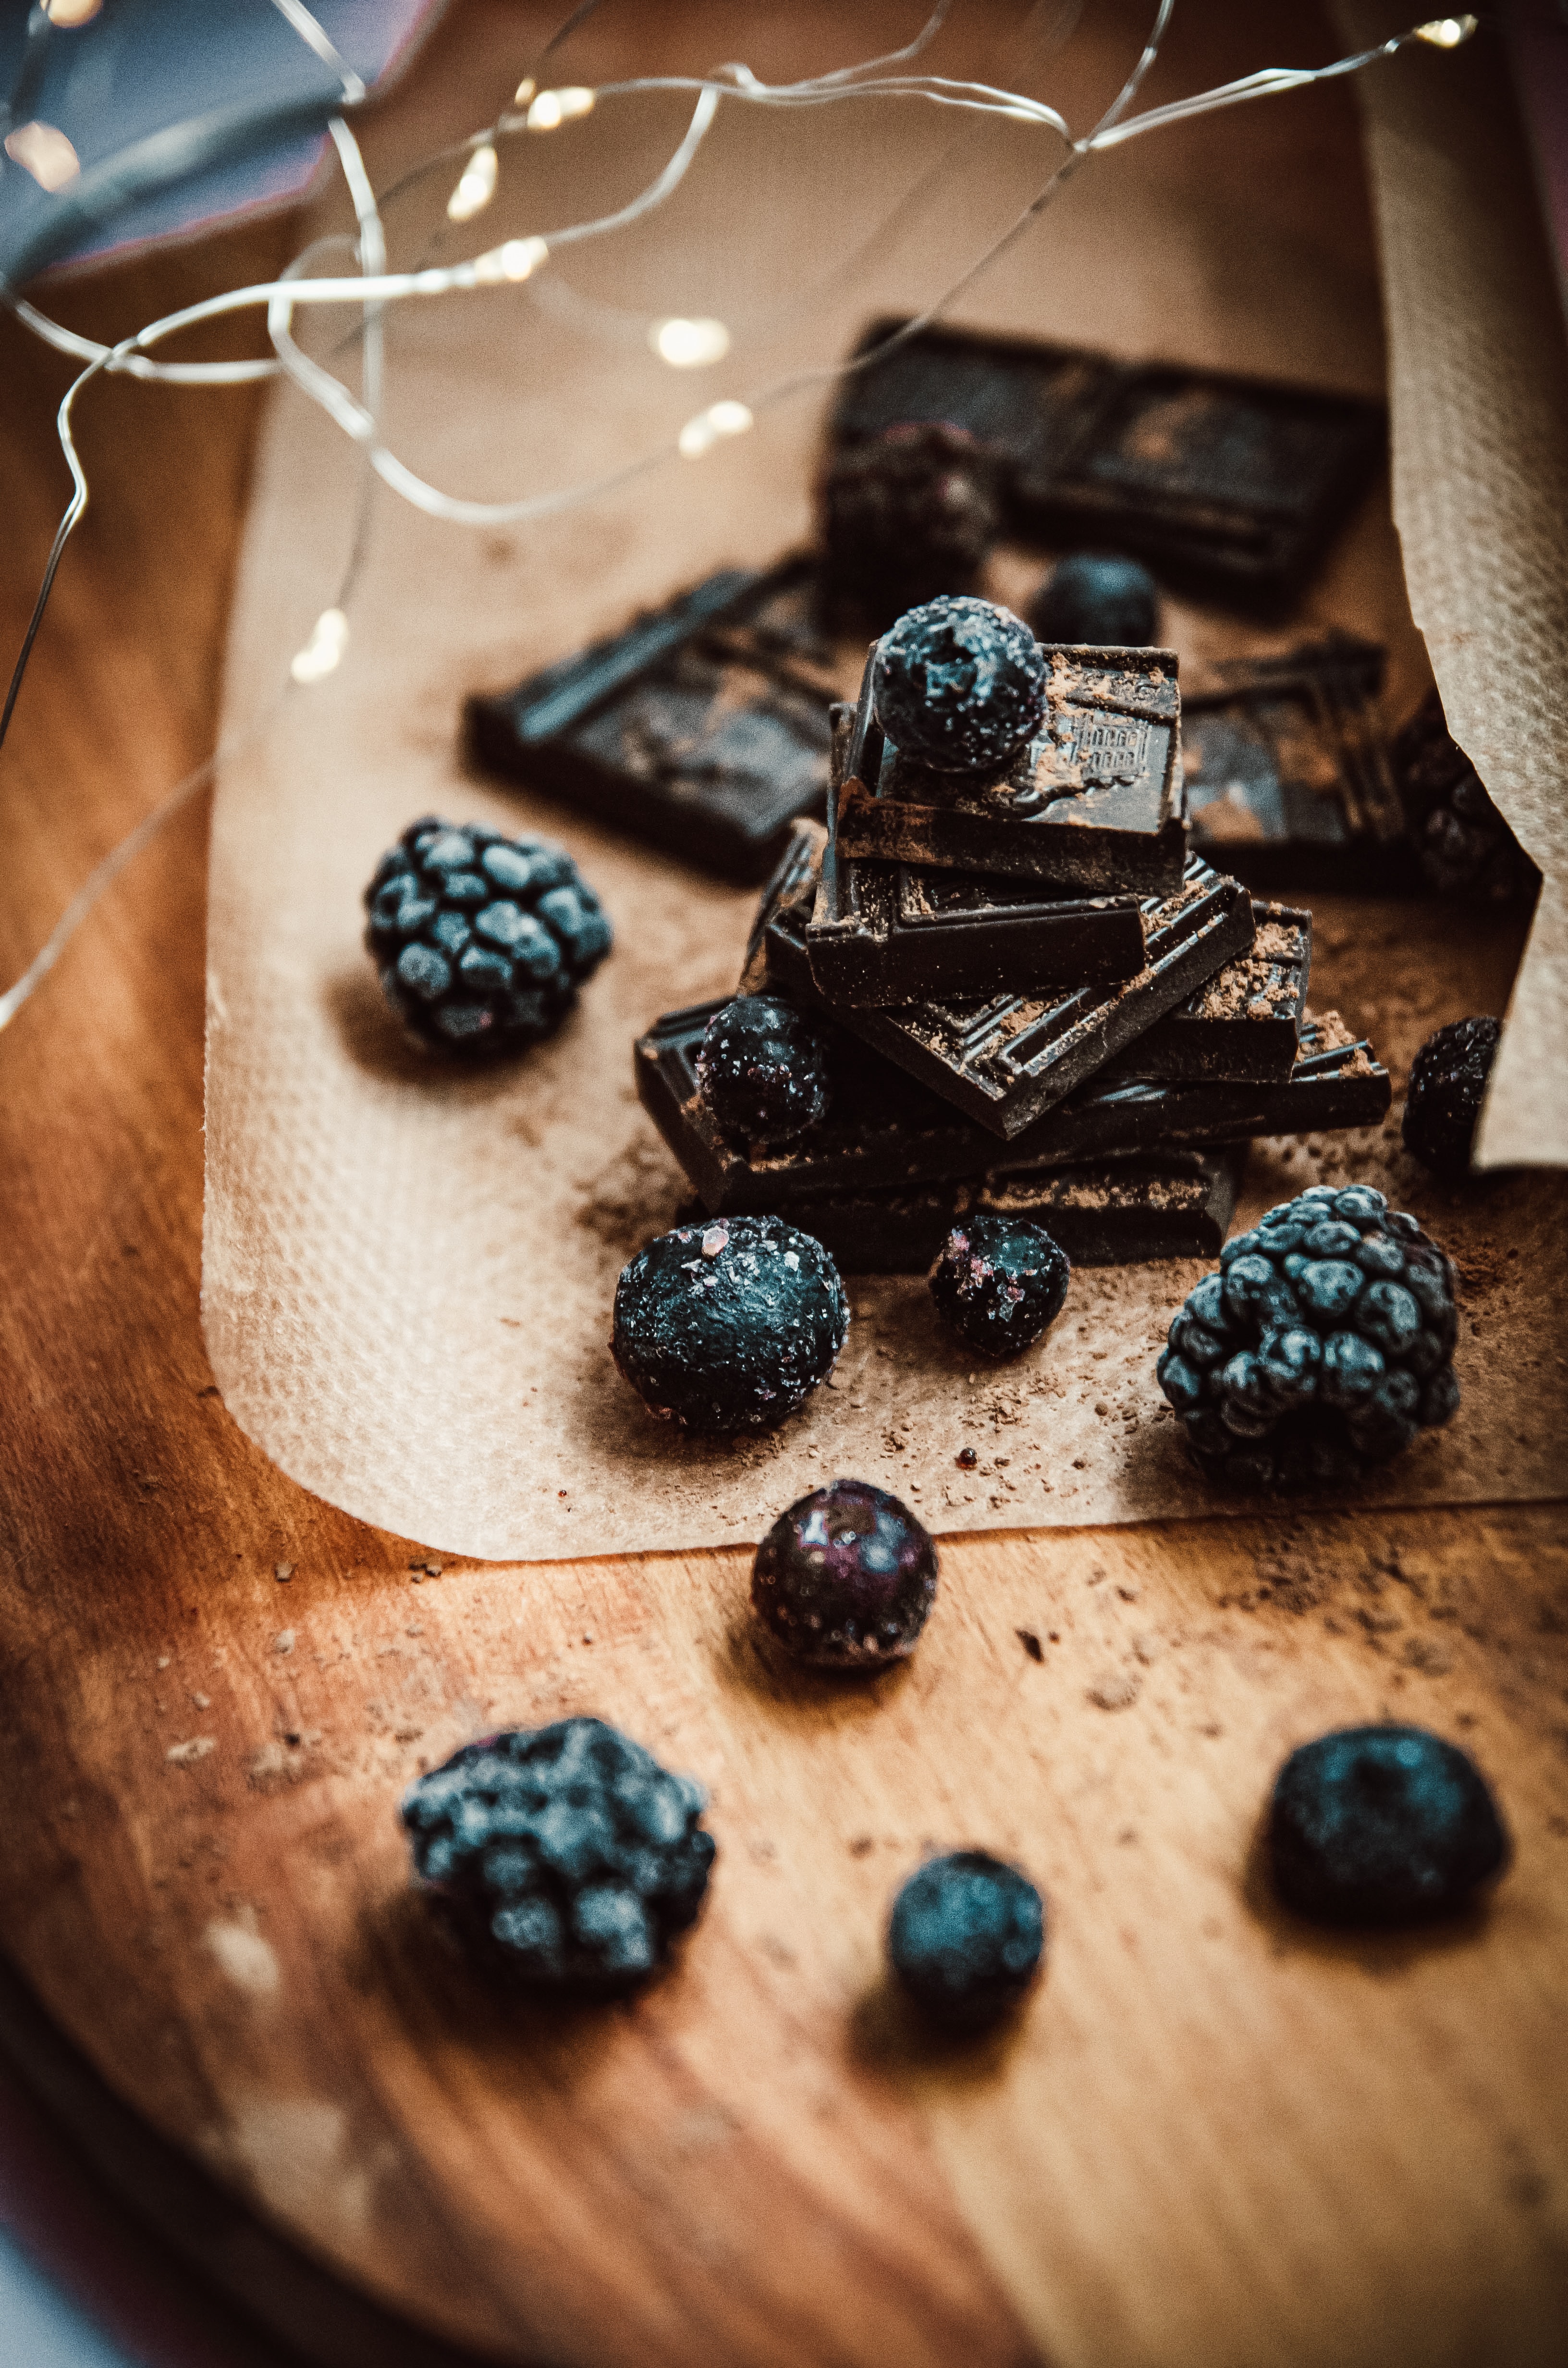 87304 download wallpaper chocolate, food, bilberries, berries, blackberry screensavers and pictures for free